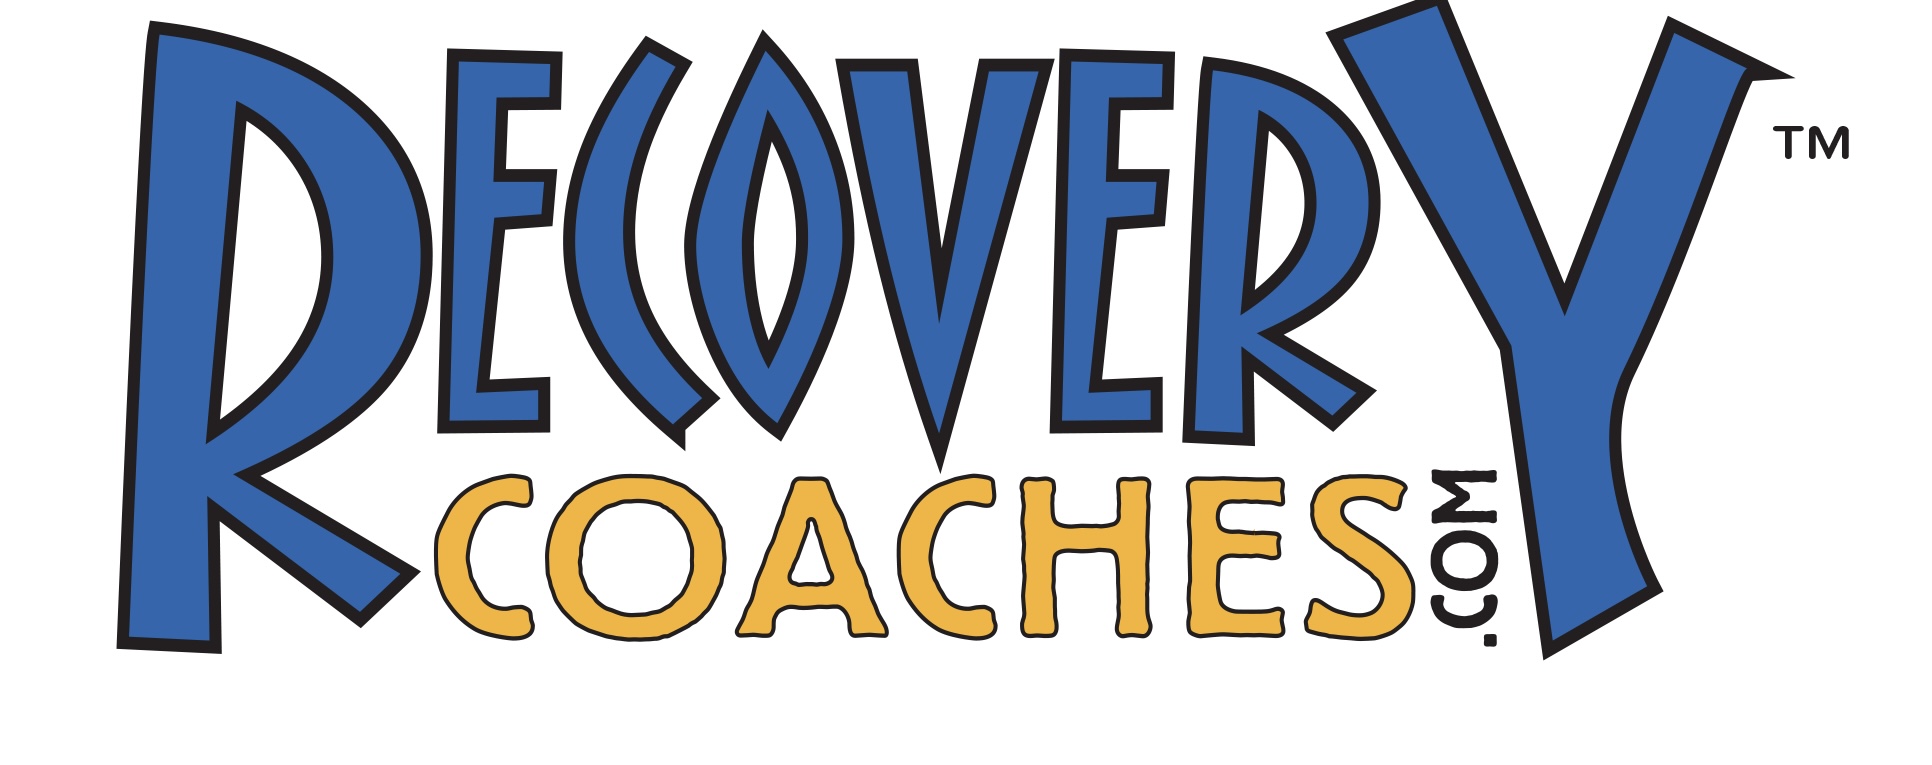 Recovery coaches